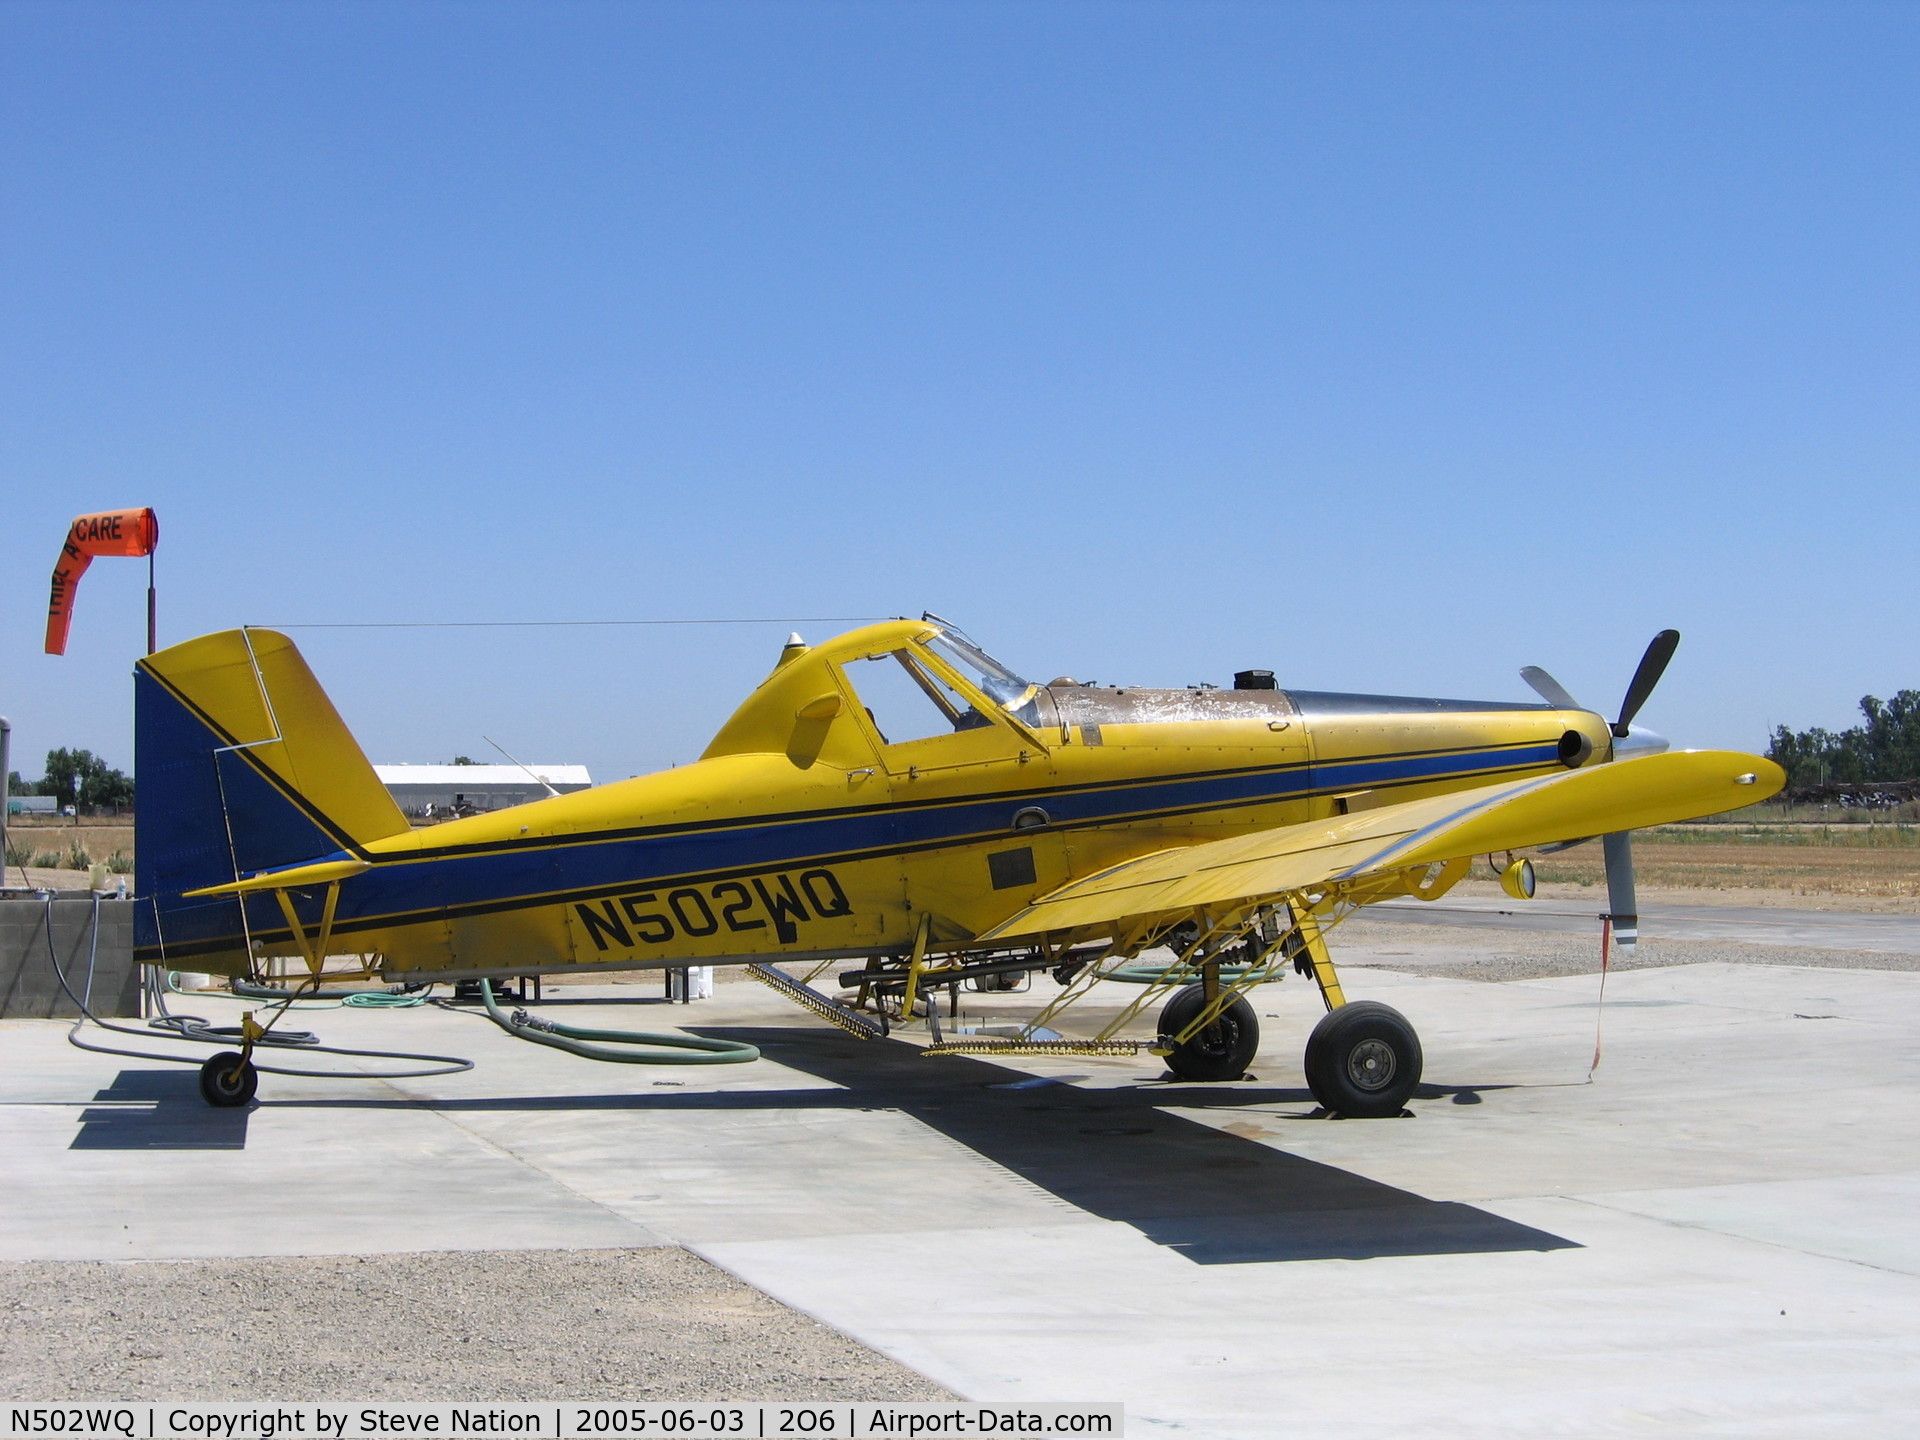 N502WQ, Air Tractor Inc AT-502 C/N 502-0085, Thiel Air Care Air Tractor AT-502 as sprayer at Chowchilla, CA.  This aircraft crashed at 0430 PDT on August 5, 2006 while spraying a field about 5 miles NW of Chowchilla, CA.  The AT-502 impacted the ground inverted and the pilot, tragically, was fatally